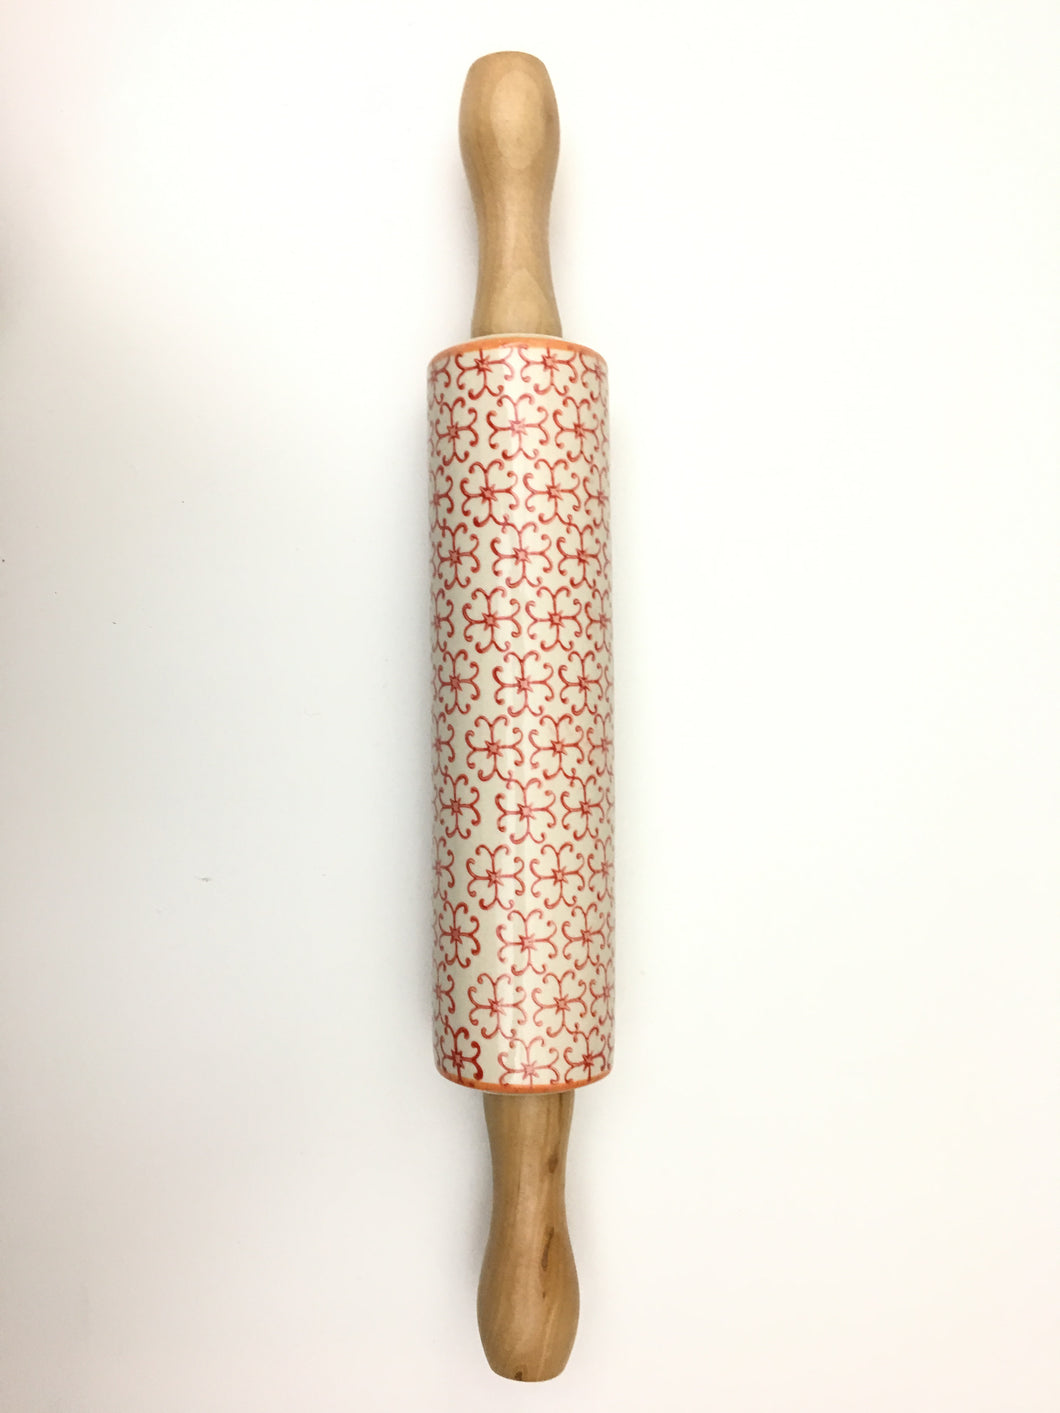 Ceramic and wood rolling pin